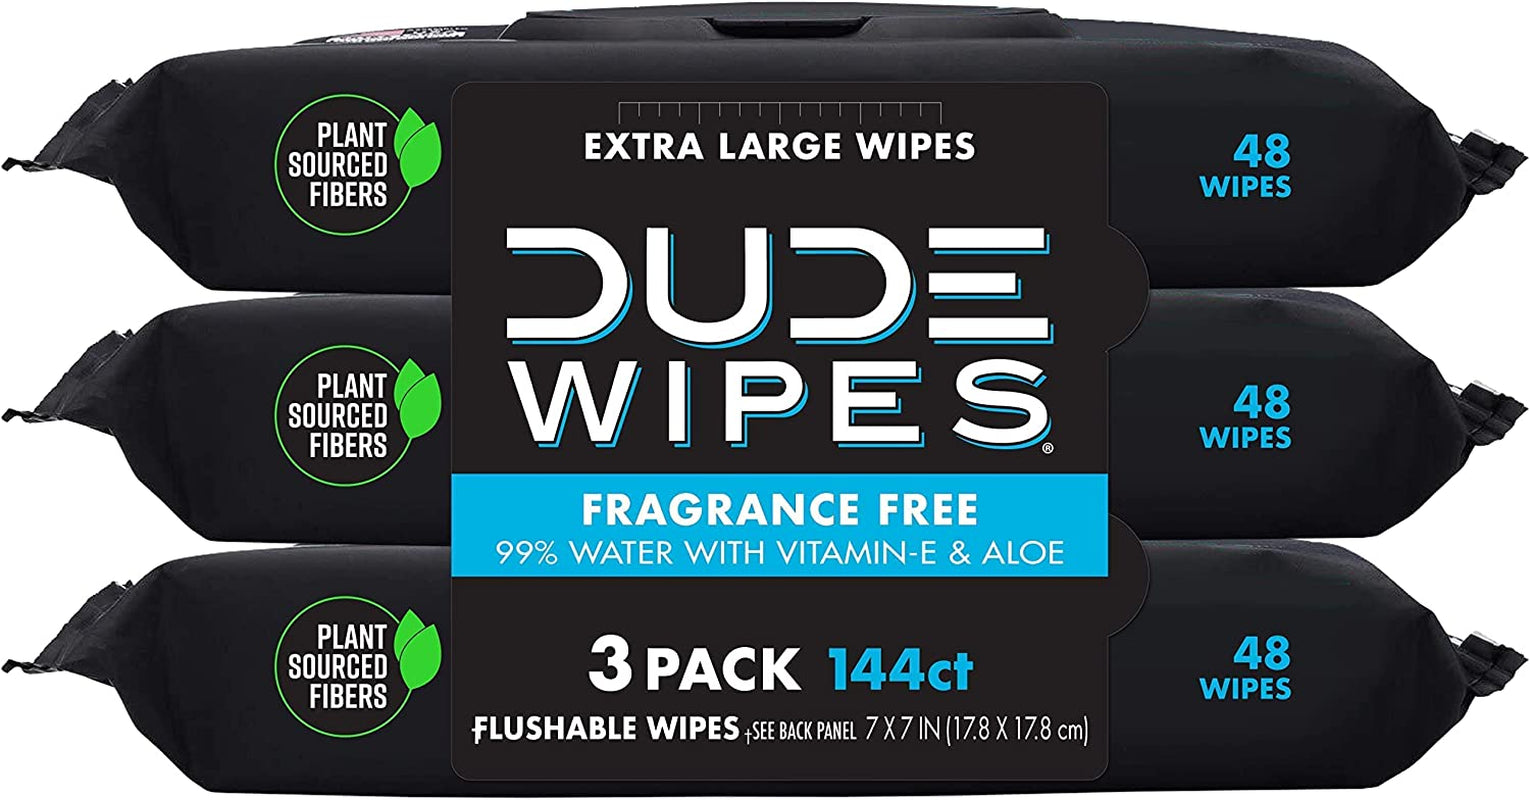 - Flushable Wipes - 3 Pack, 144 Wipes - Unscented Extra-Large Adult Wet Wipes - Vitamin-E & Aloe for At-Home Use - Septic and Sewer Safe